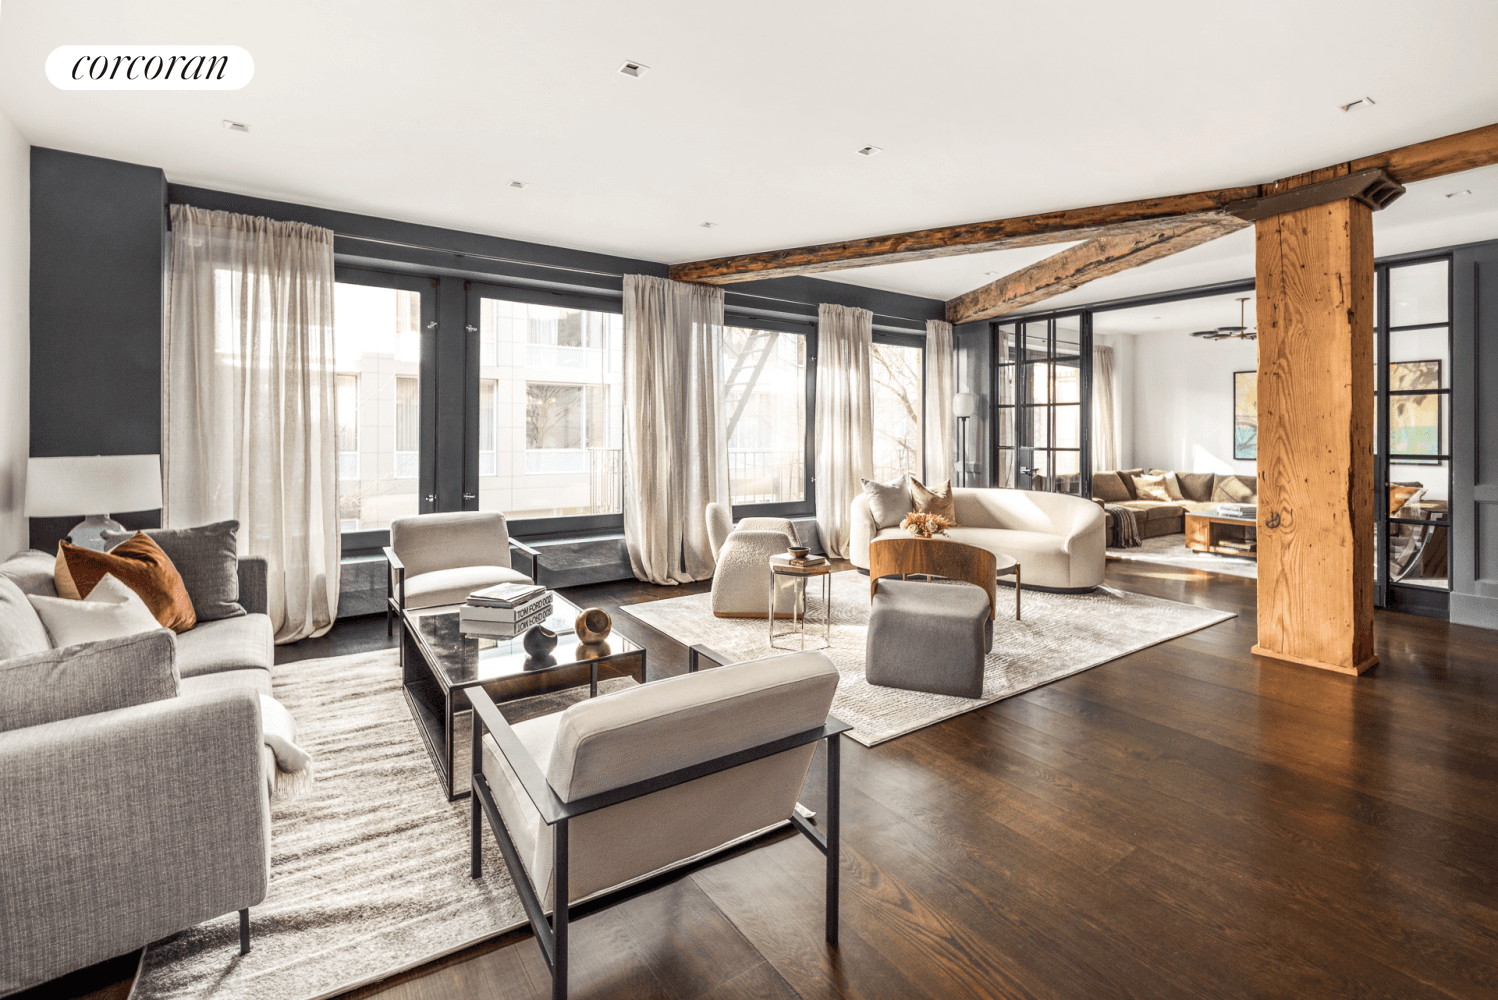 Magnificently renovated SoHo loft with incredible 40 feet of windows over looking iconic cobblestoned Wooster Street.